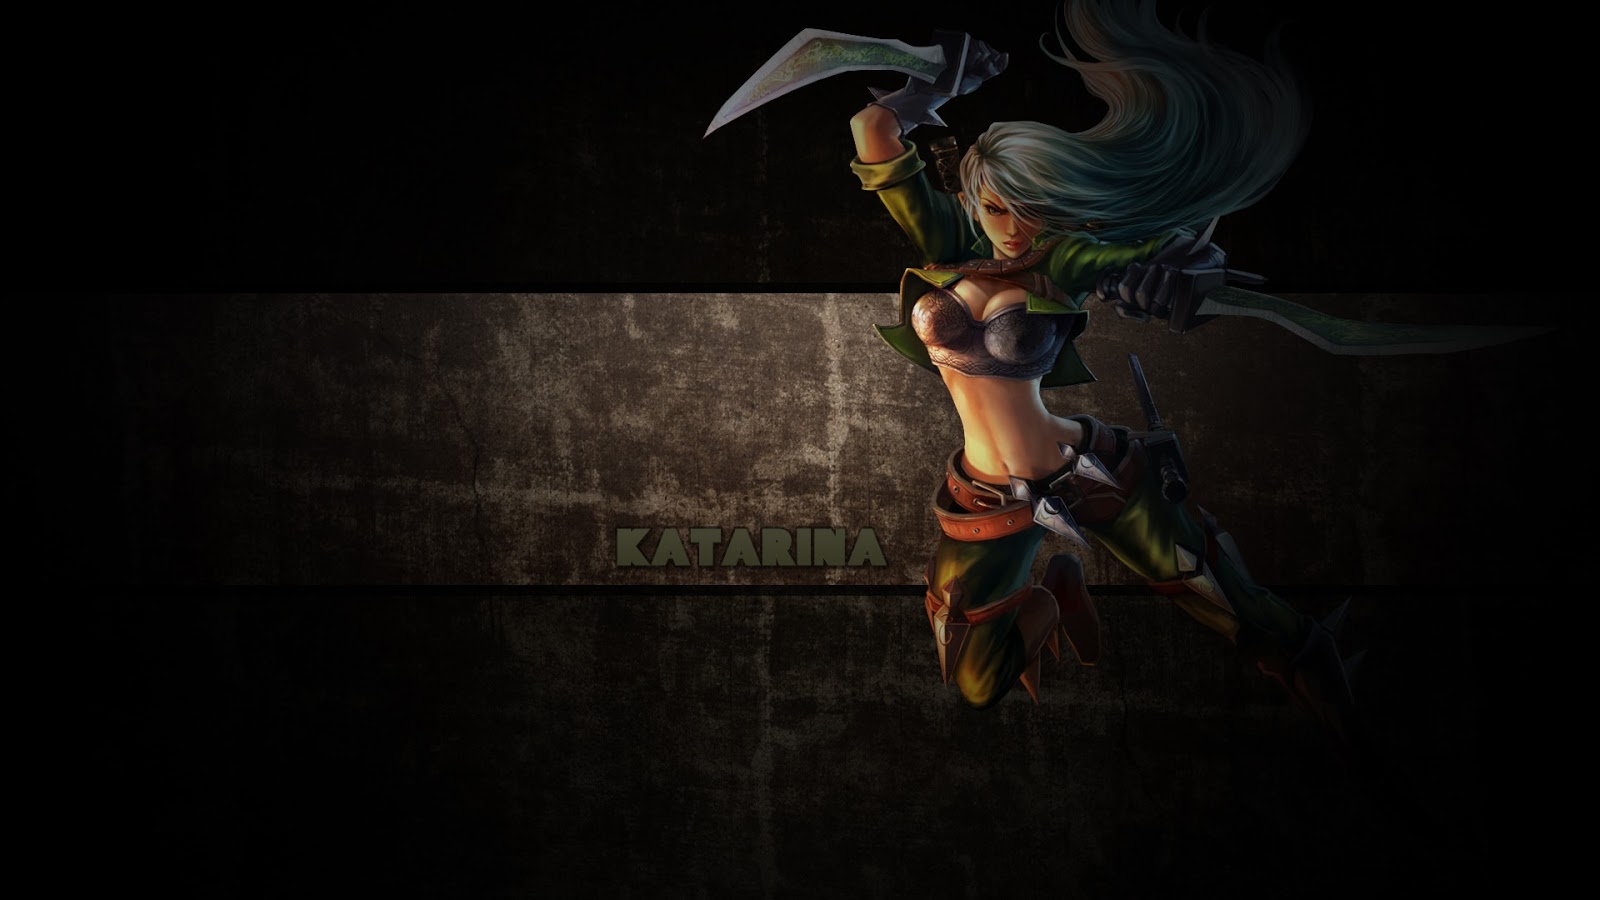 League Of Legends Hd Wallpapers Omg My Favorite Mid Laner Katarina~ Meow